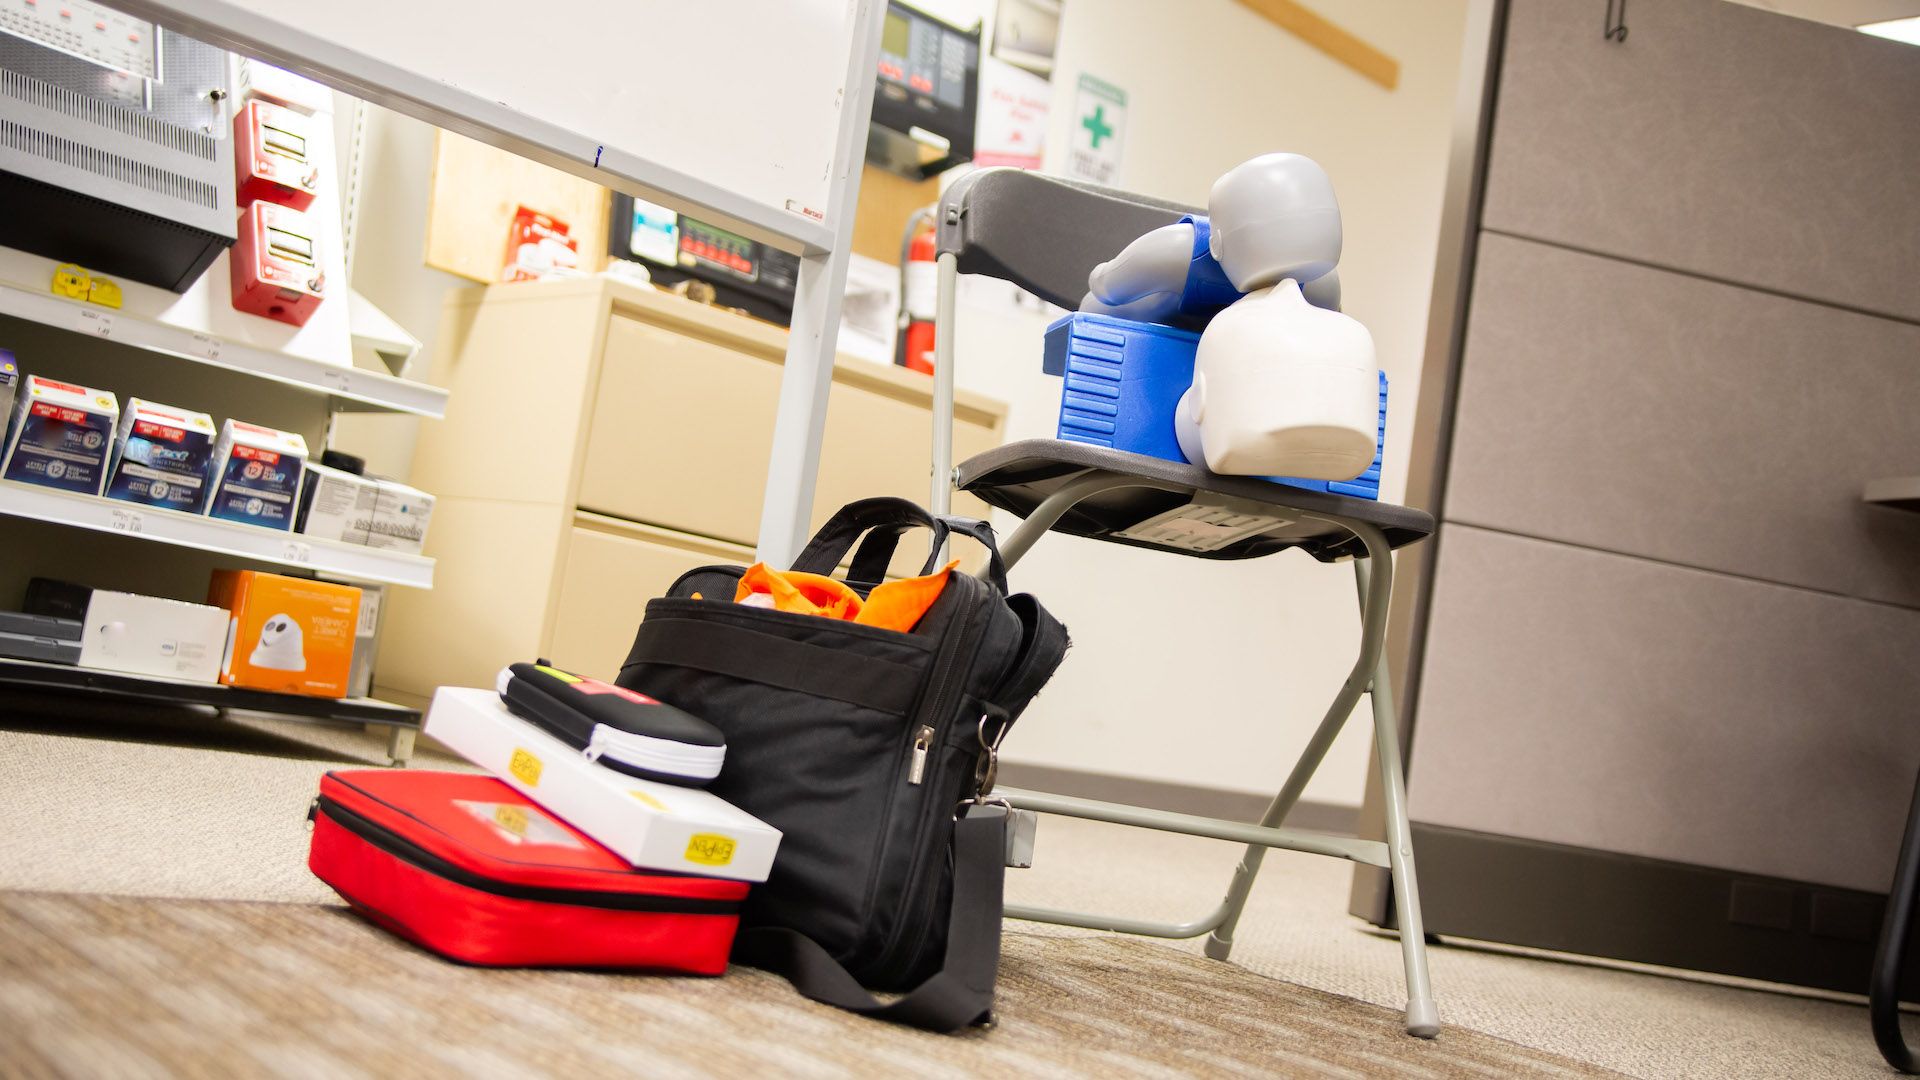 First Aid and CPR training equipment placed on a chair and also next to it at Flex Point Academy's office in Etobicoke, Ontario